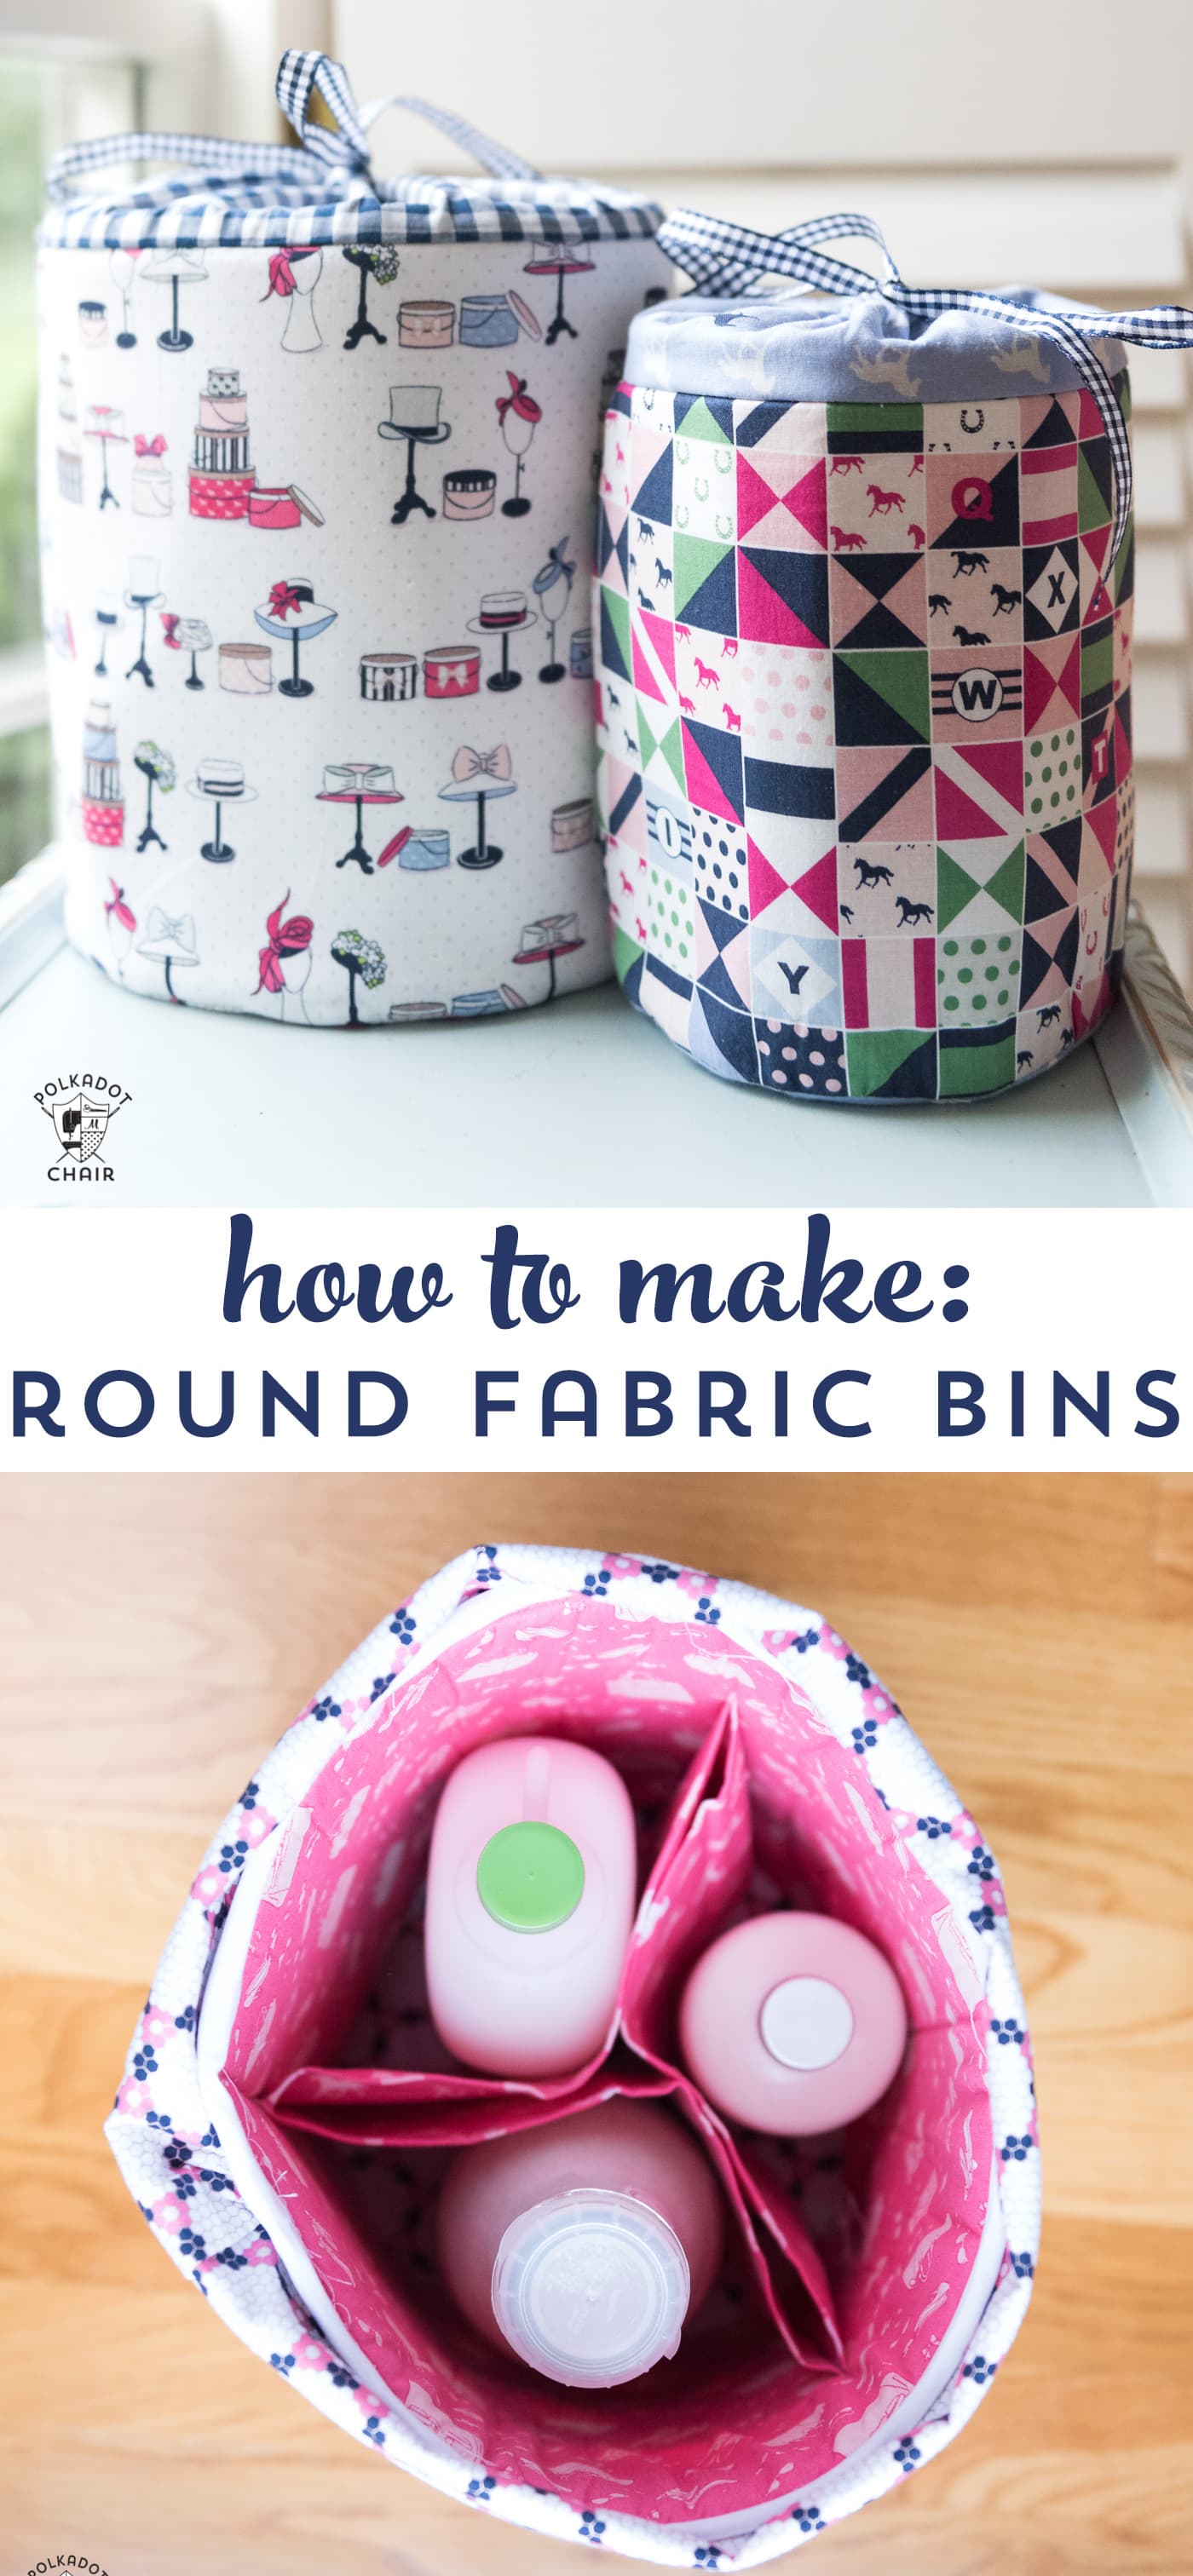 Learn how to make fabric storage bins with this sewing pattern. Round padded storage bins, great for organization projects! #fabricbins #fabricstorage #fabricbasket #sewingpattern #DIYBasket